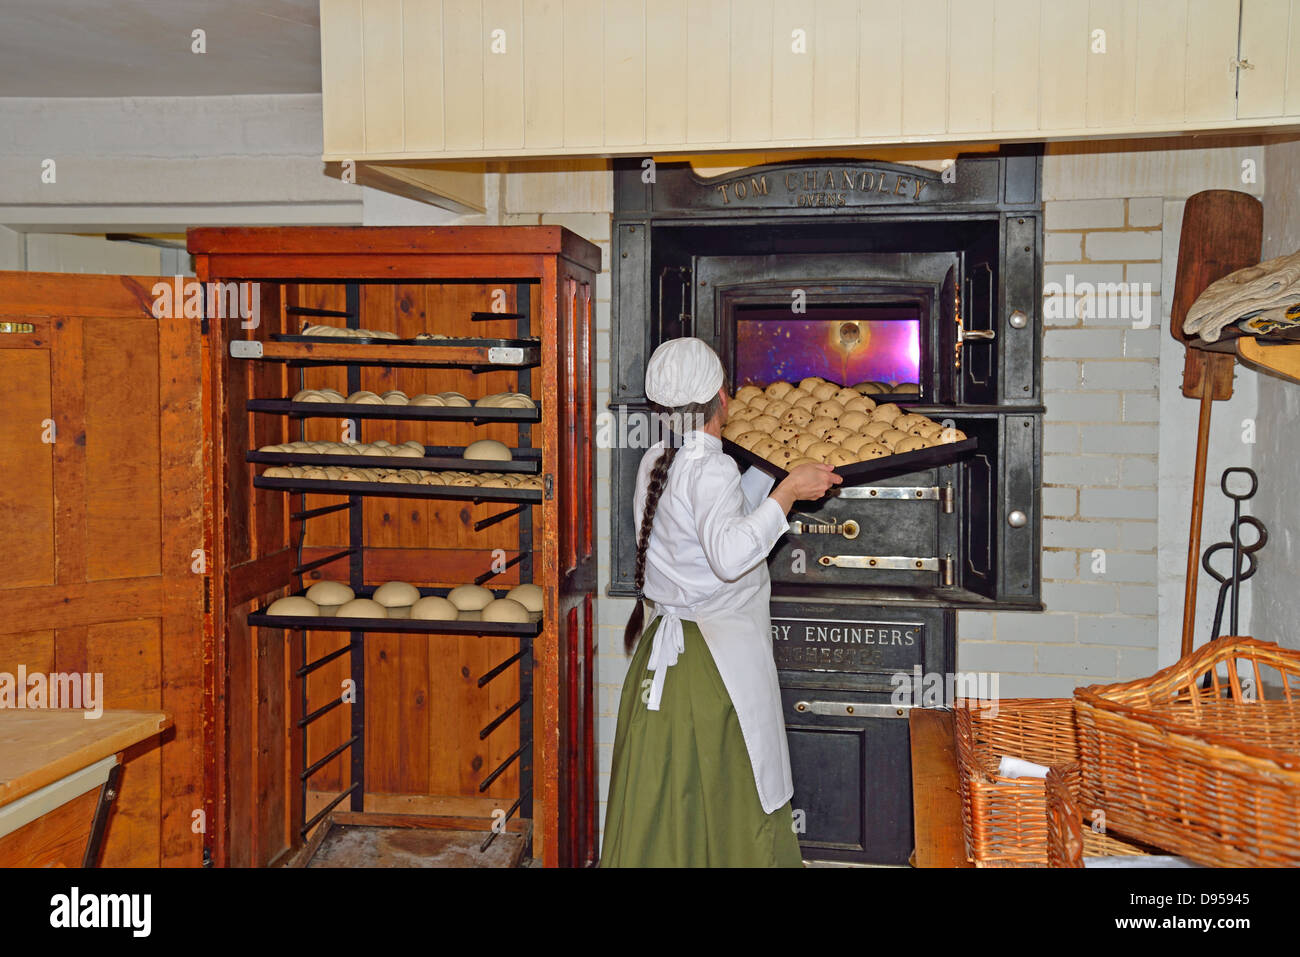 Victorian bakery, Blists Hill Victorian Town, Madeley, Telford, Shropshire, England, United Kingdom Stock Photo